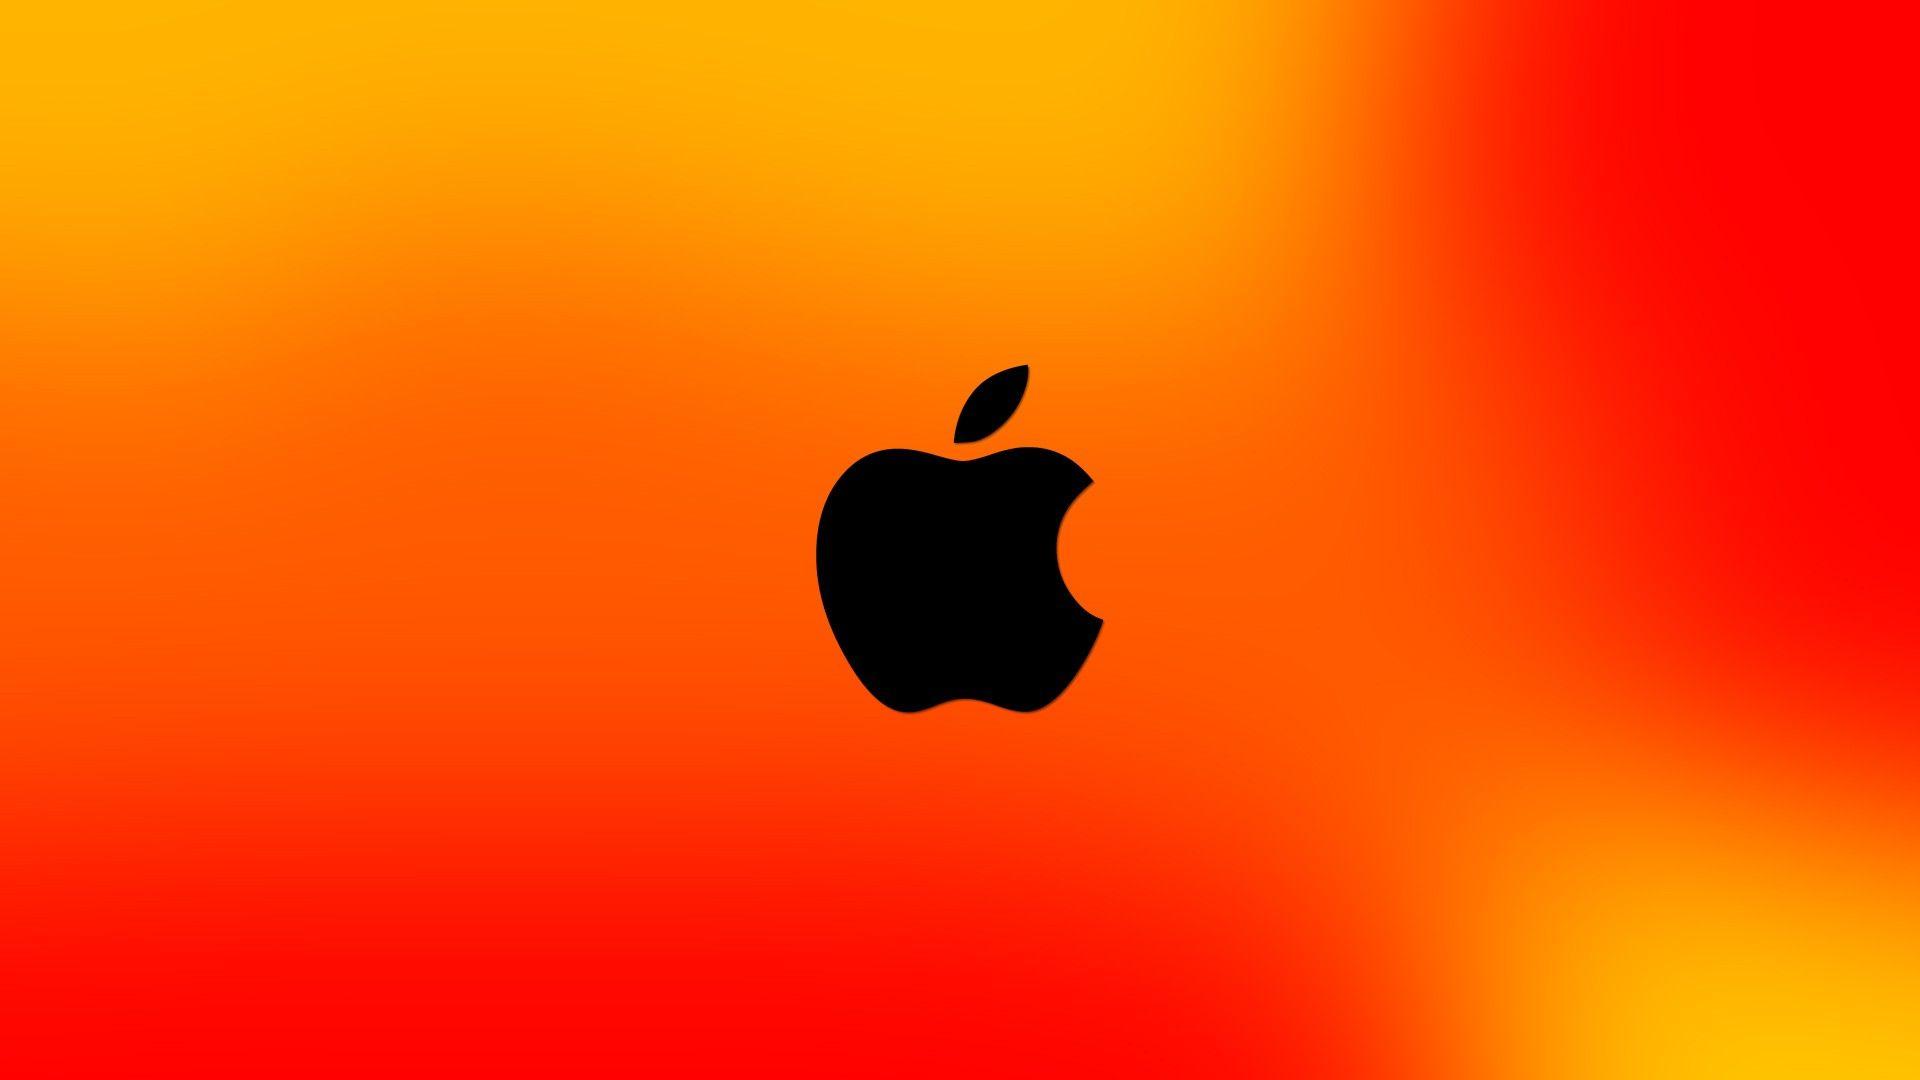 4 Cool Apple Logo Iphone Wallpapers Hd - vrogue.co